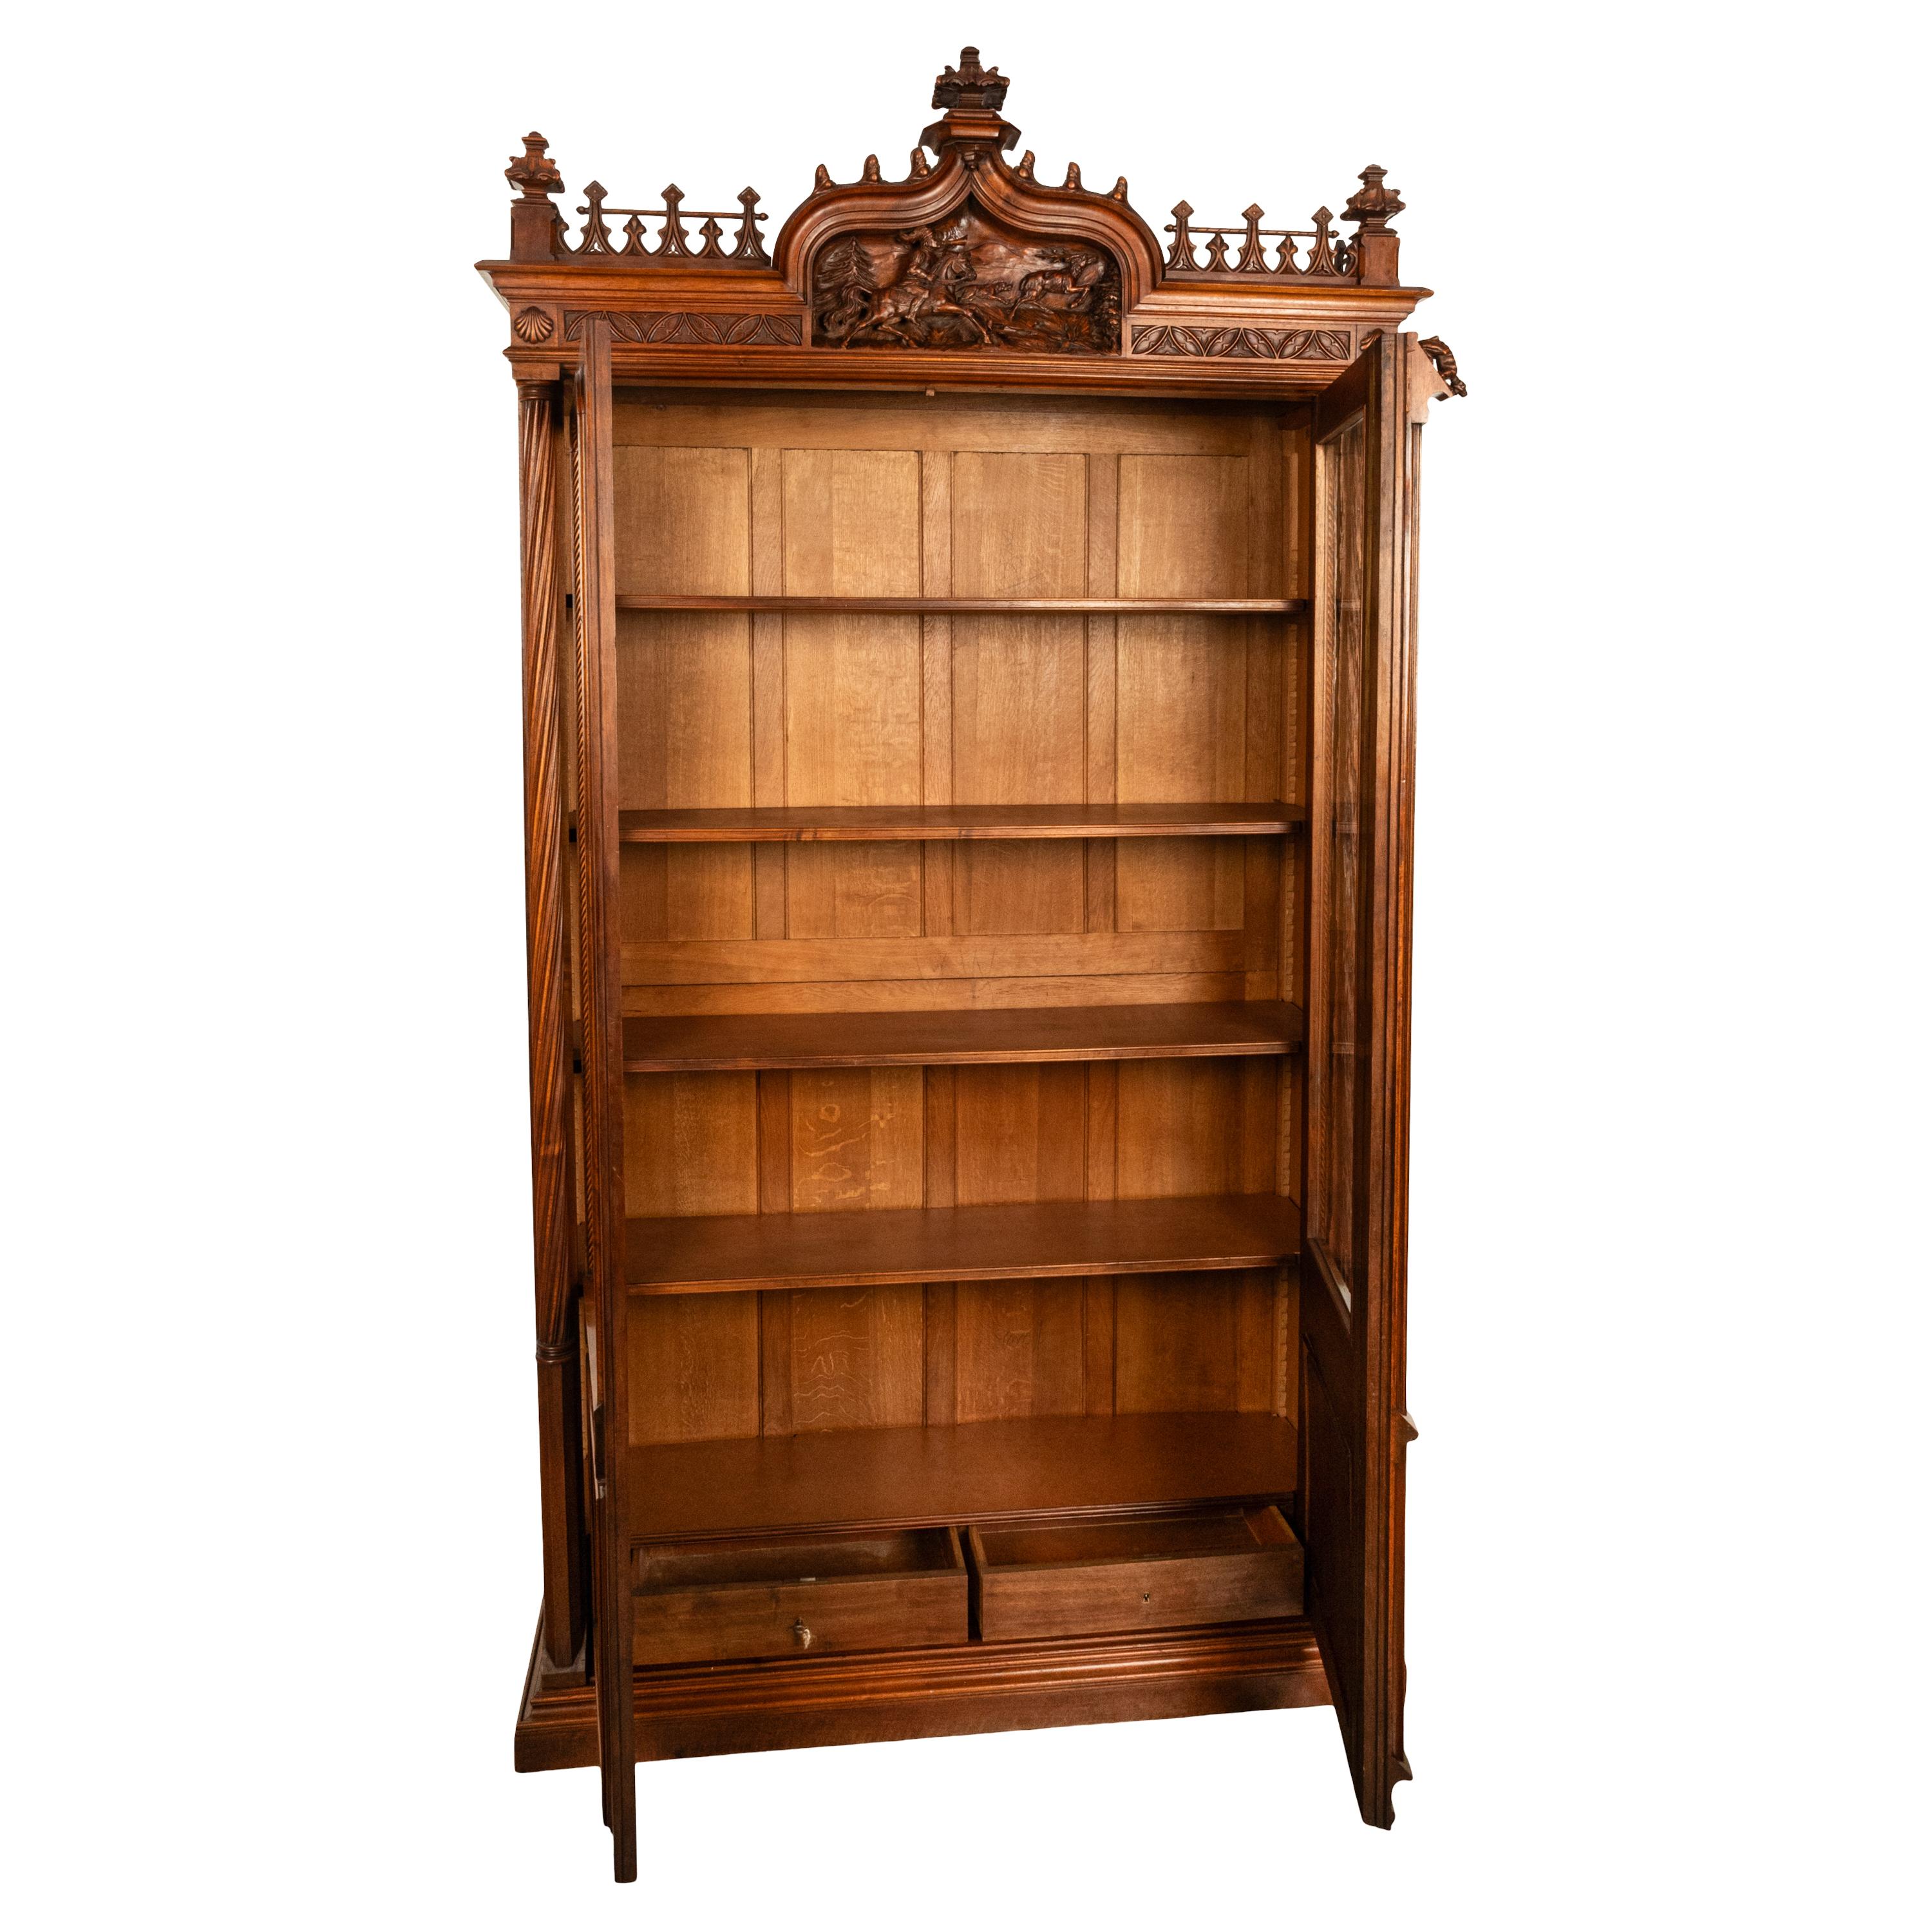 Antique French Carved Oak Gothic Revival Library Bookcase Bibliotheque 1880 For Sale 2